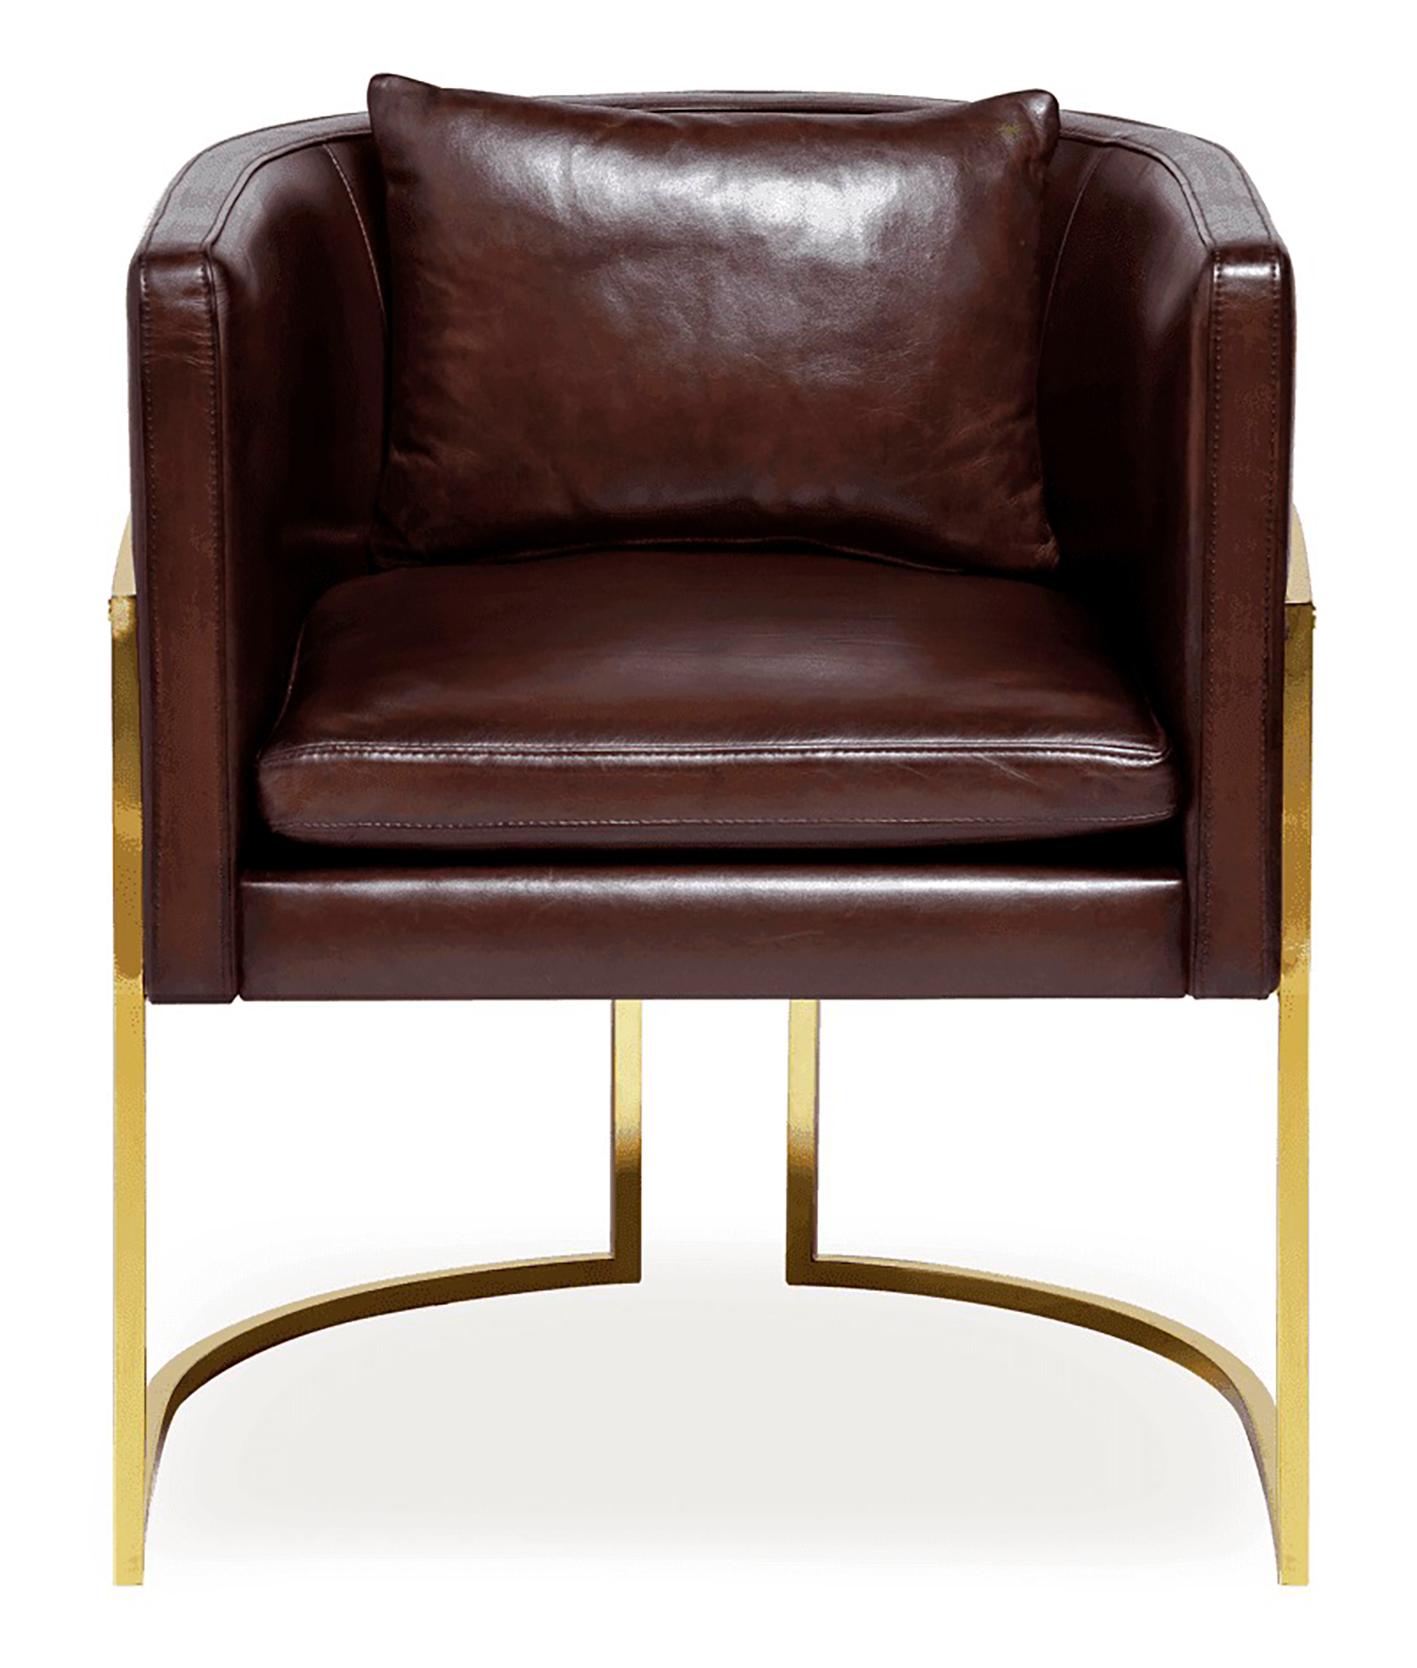 The current vogue for Art Deco furniture, combined with an interior design love affair with leather makes this chair one of the most sought after pieces in our collection. Beverly Hills chair is a versatile piece that can be used as a dining, living